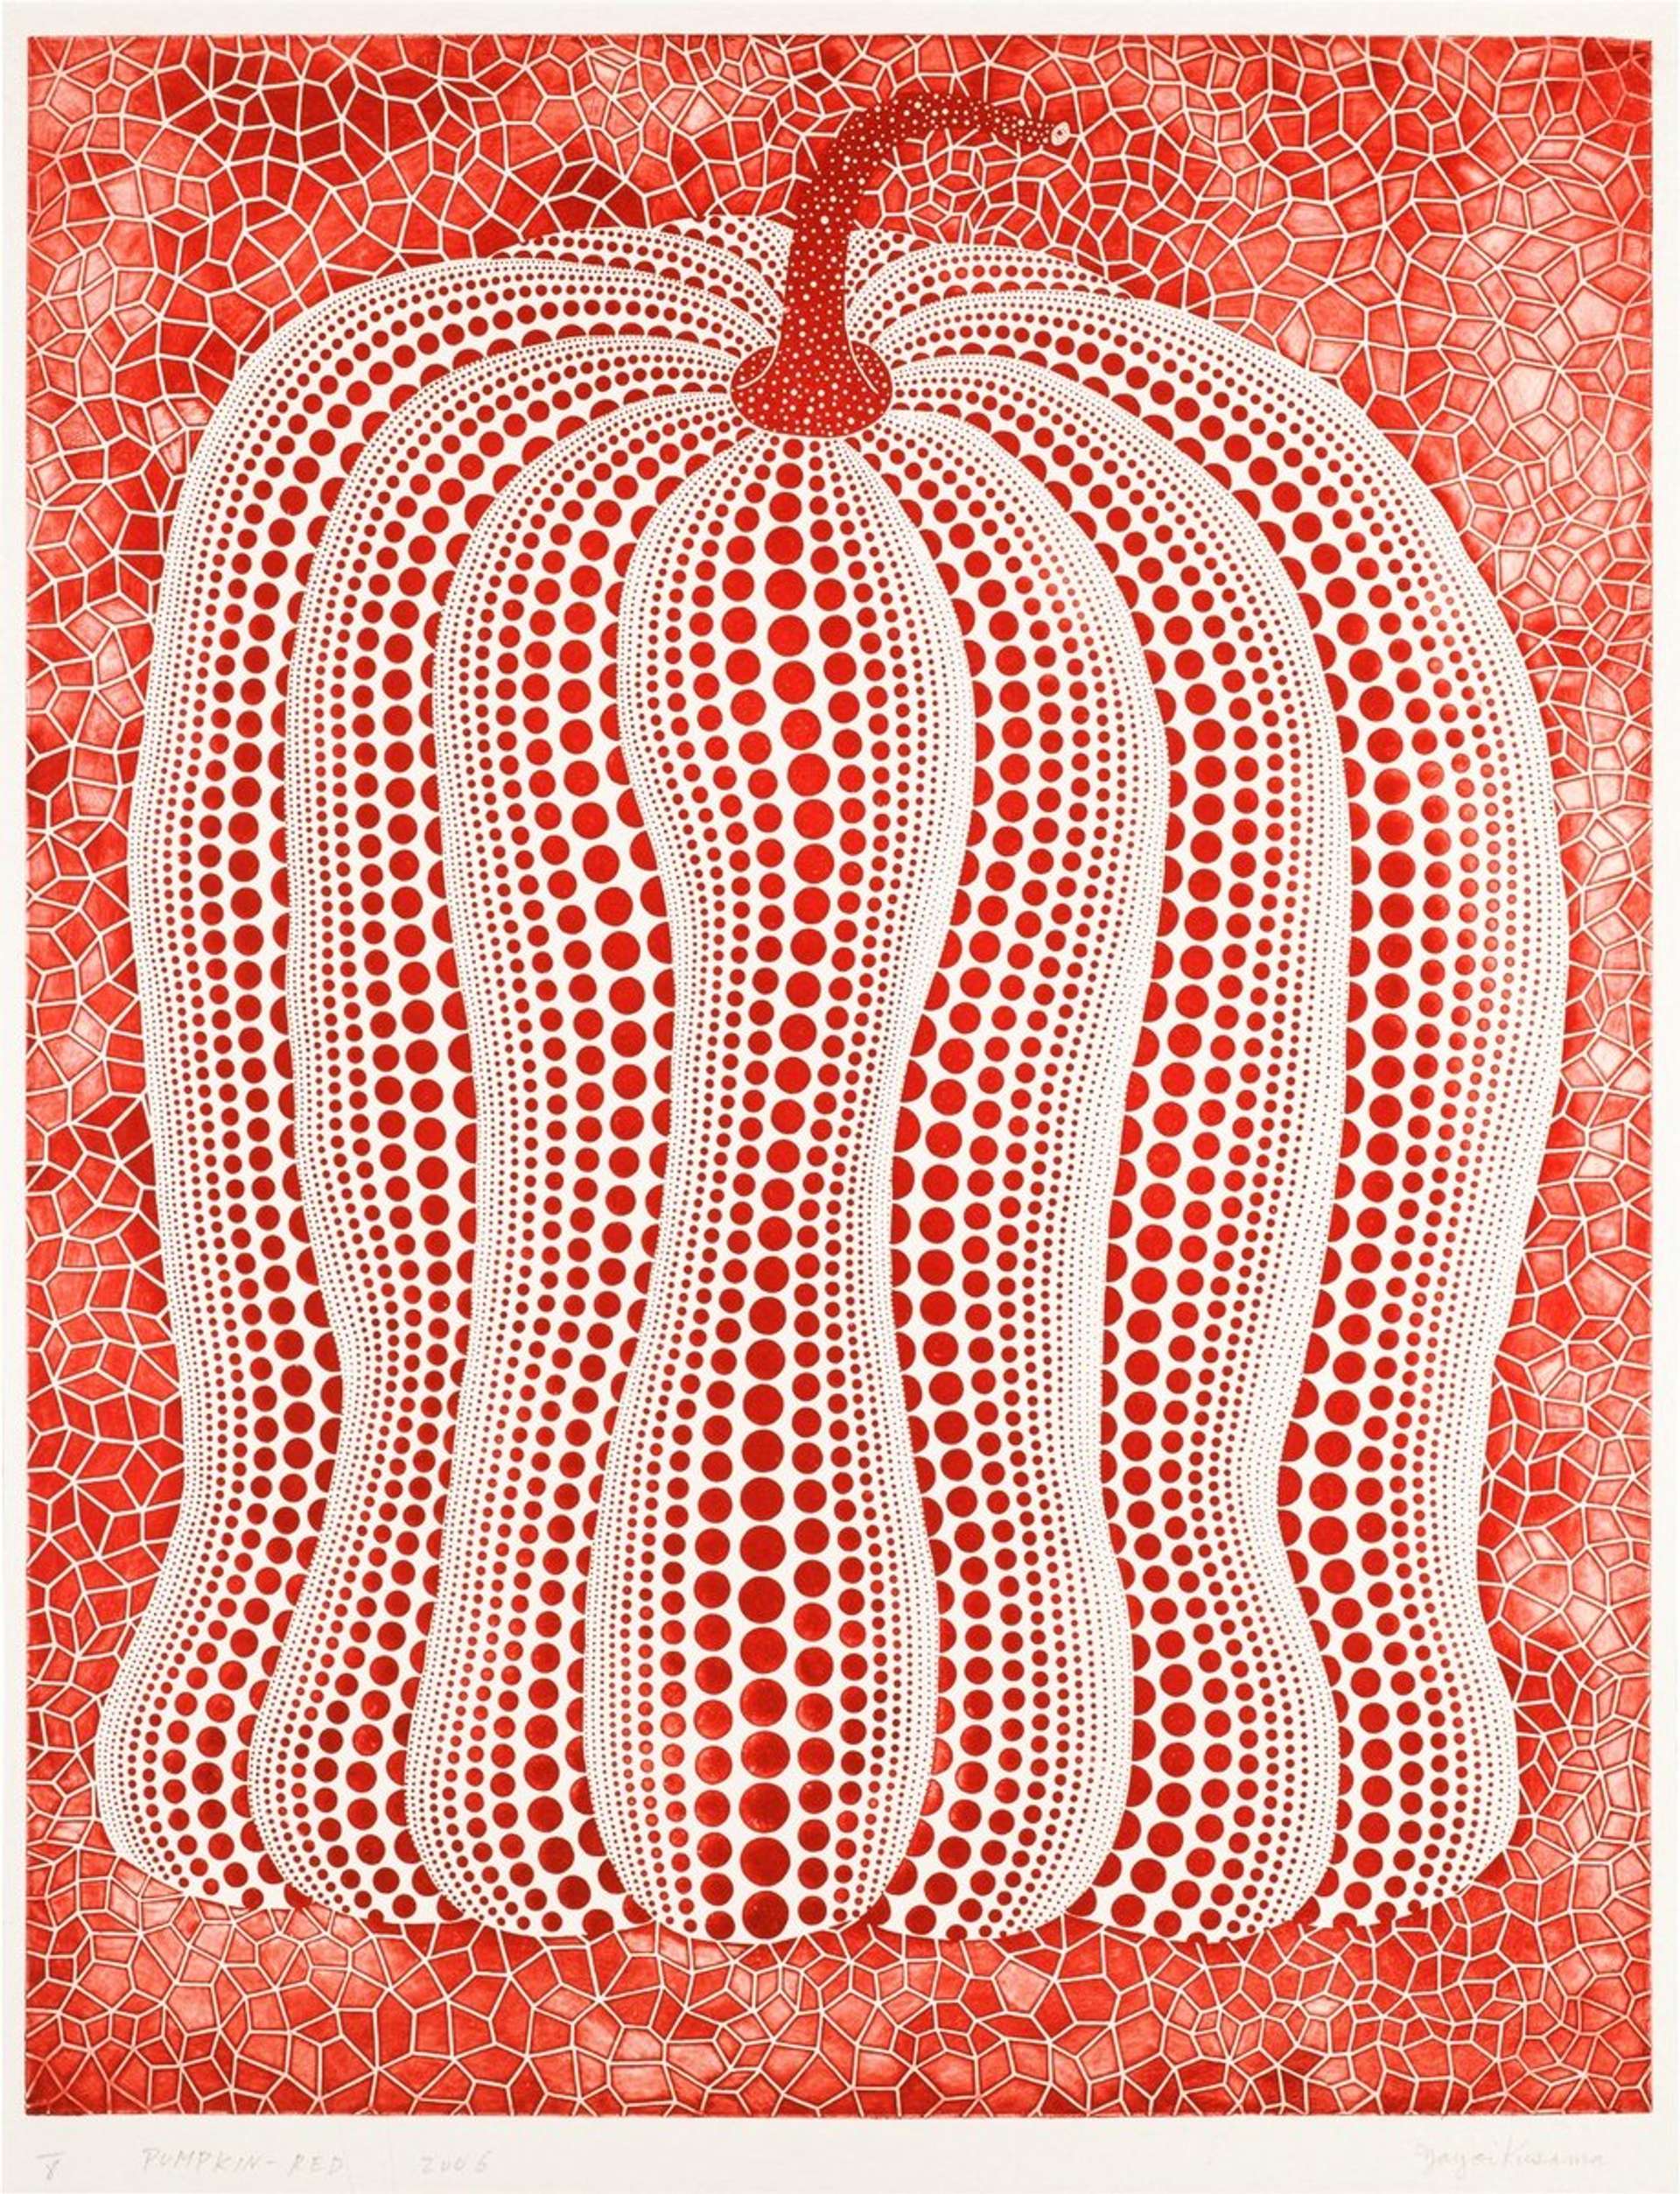 Yayoi Kusama's Pumpkin (red). An etching of a pumpkin created out of a pattern of yellow and red polka dots against a geometric patterned red background